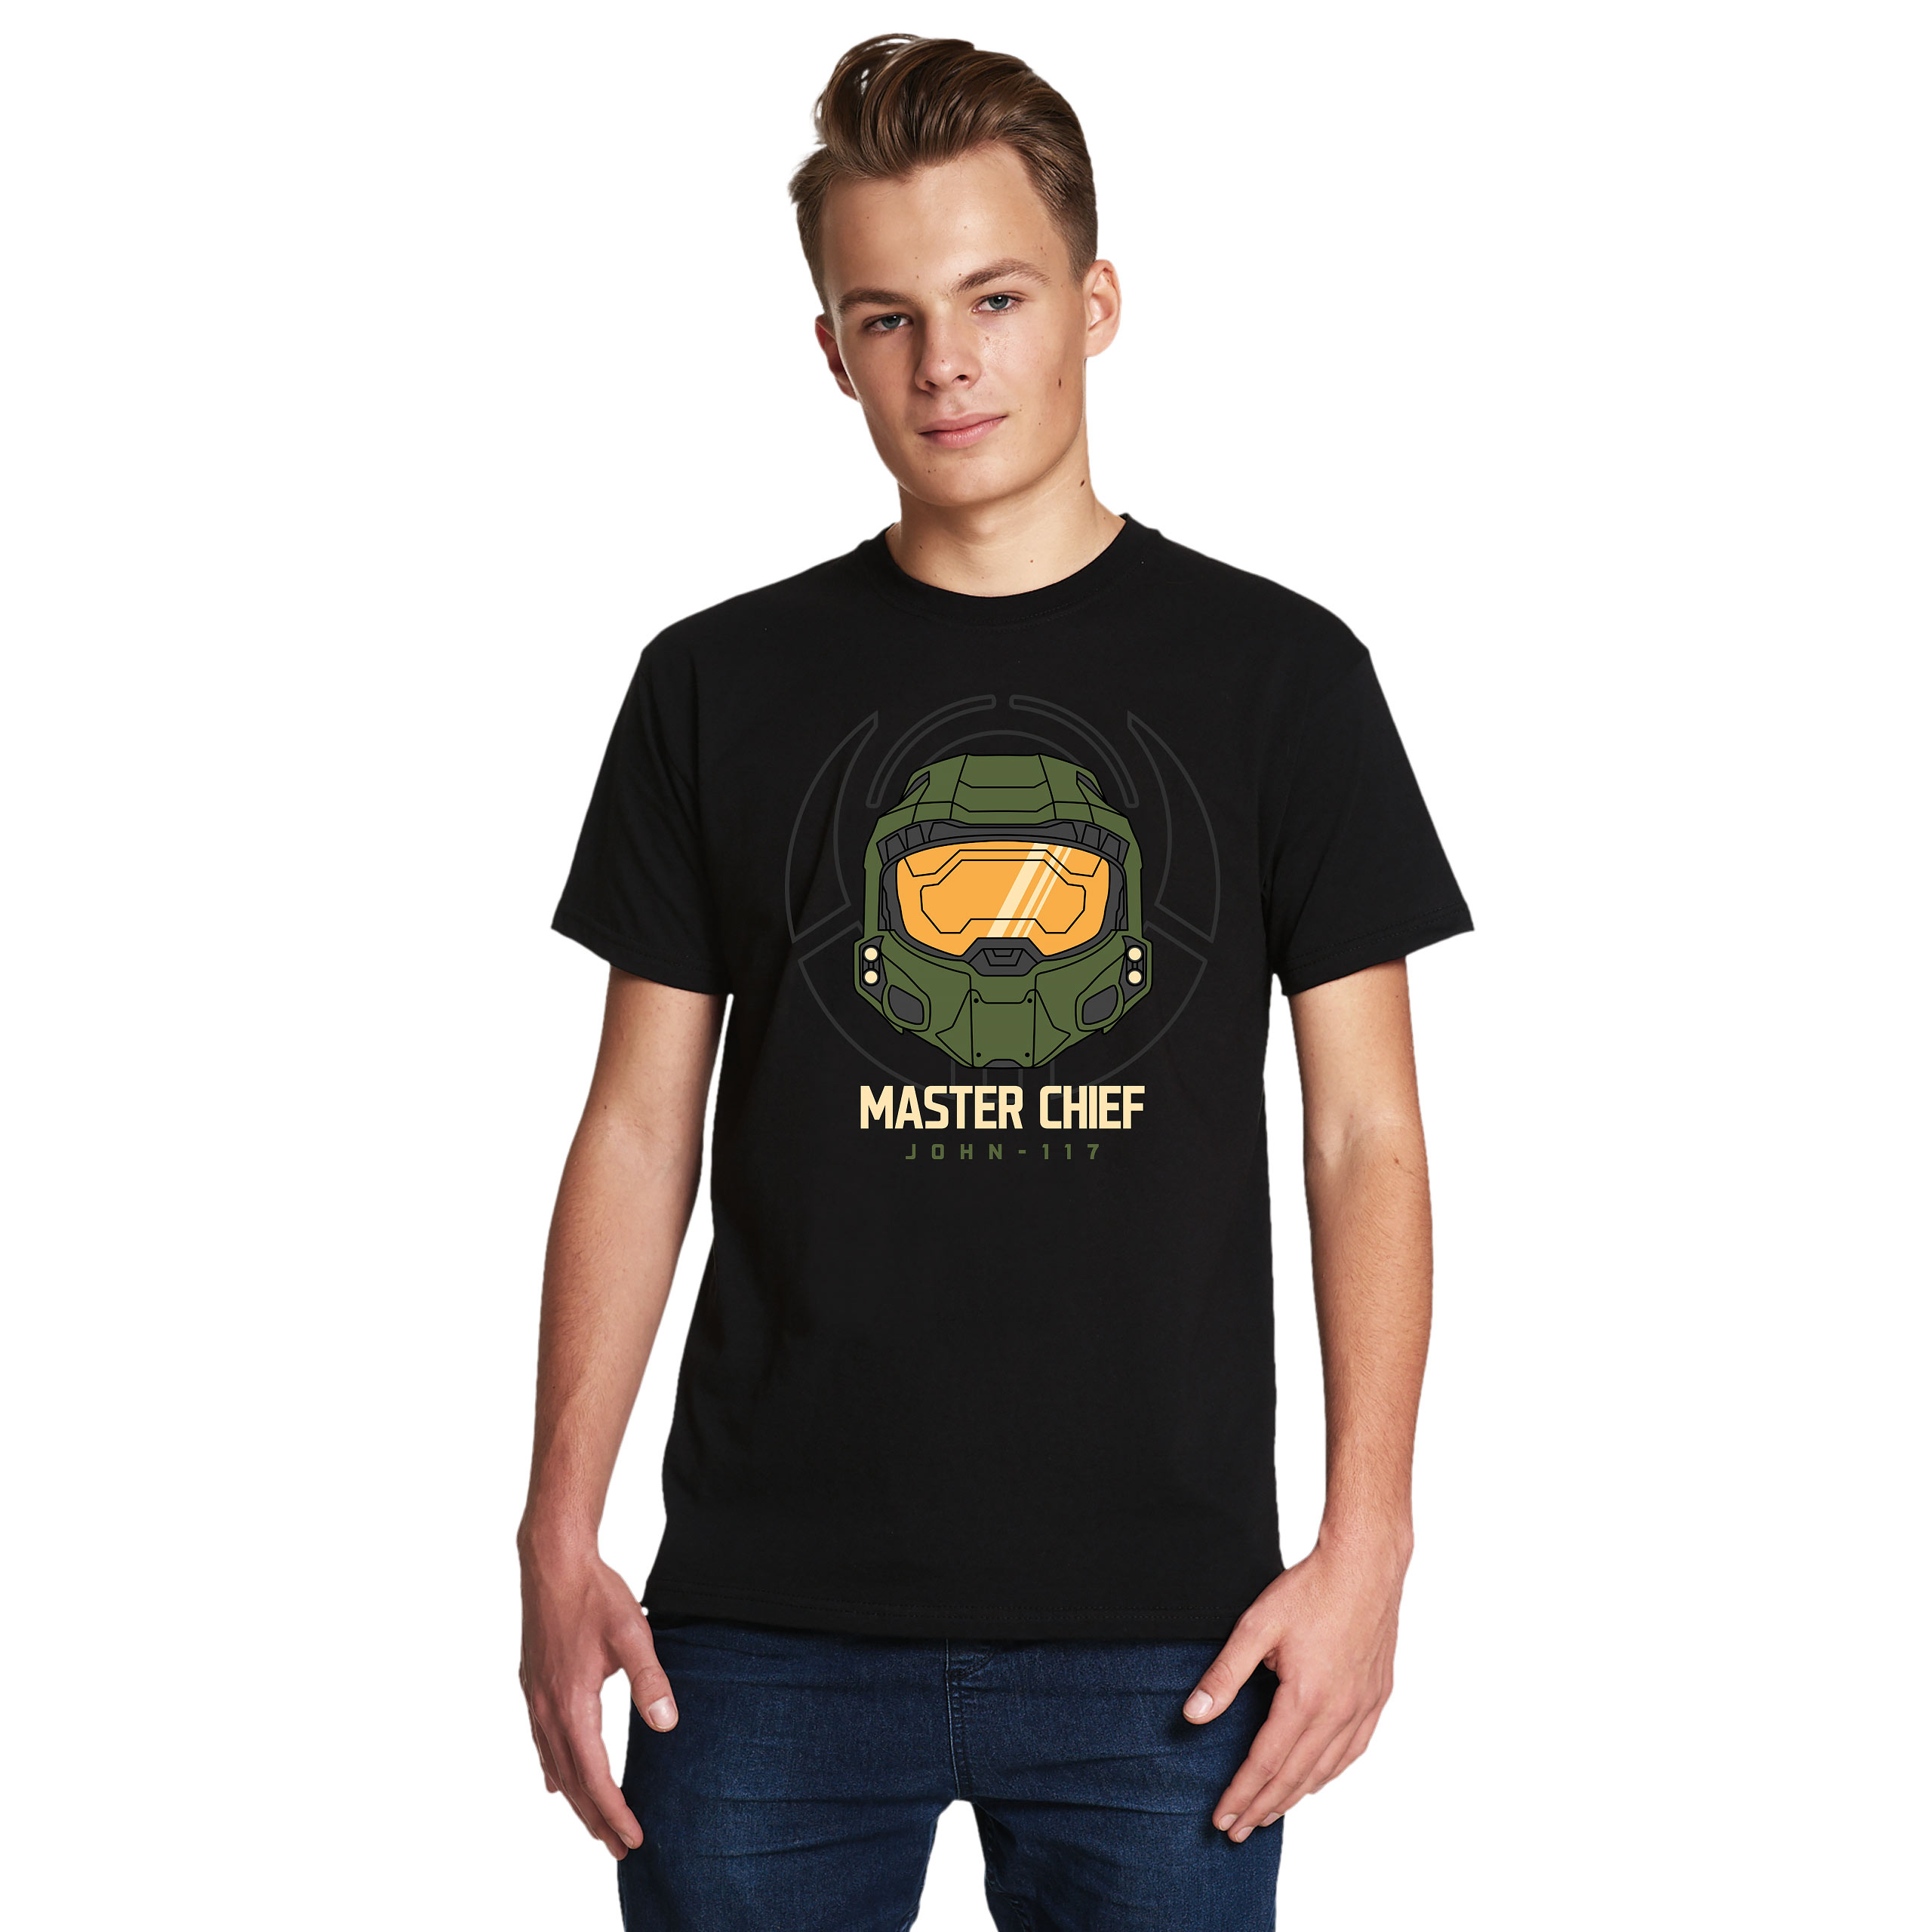 Master Chief T-Shirt for Halo Fans Black